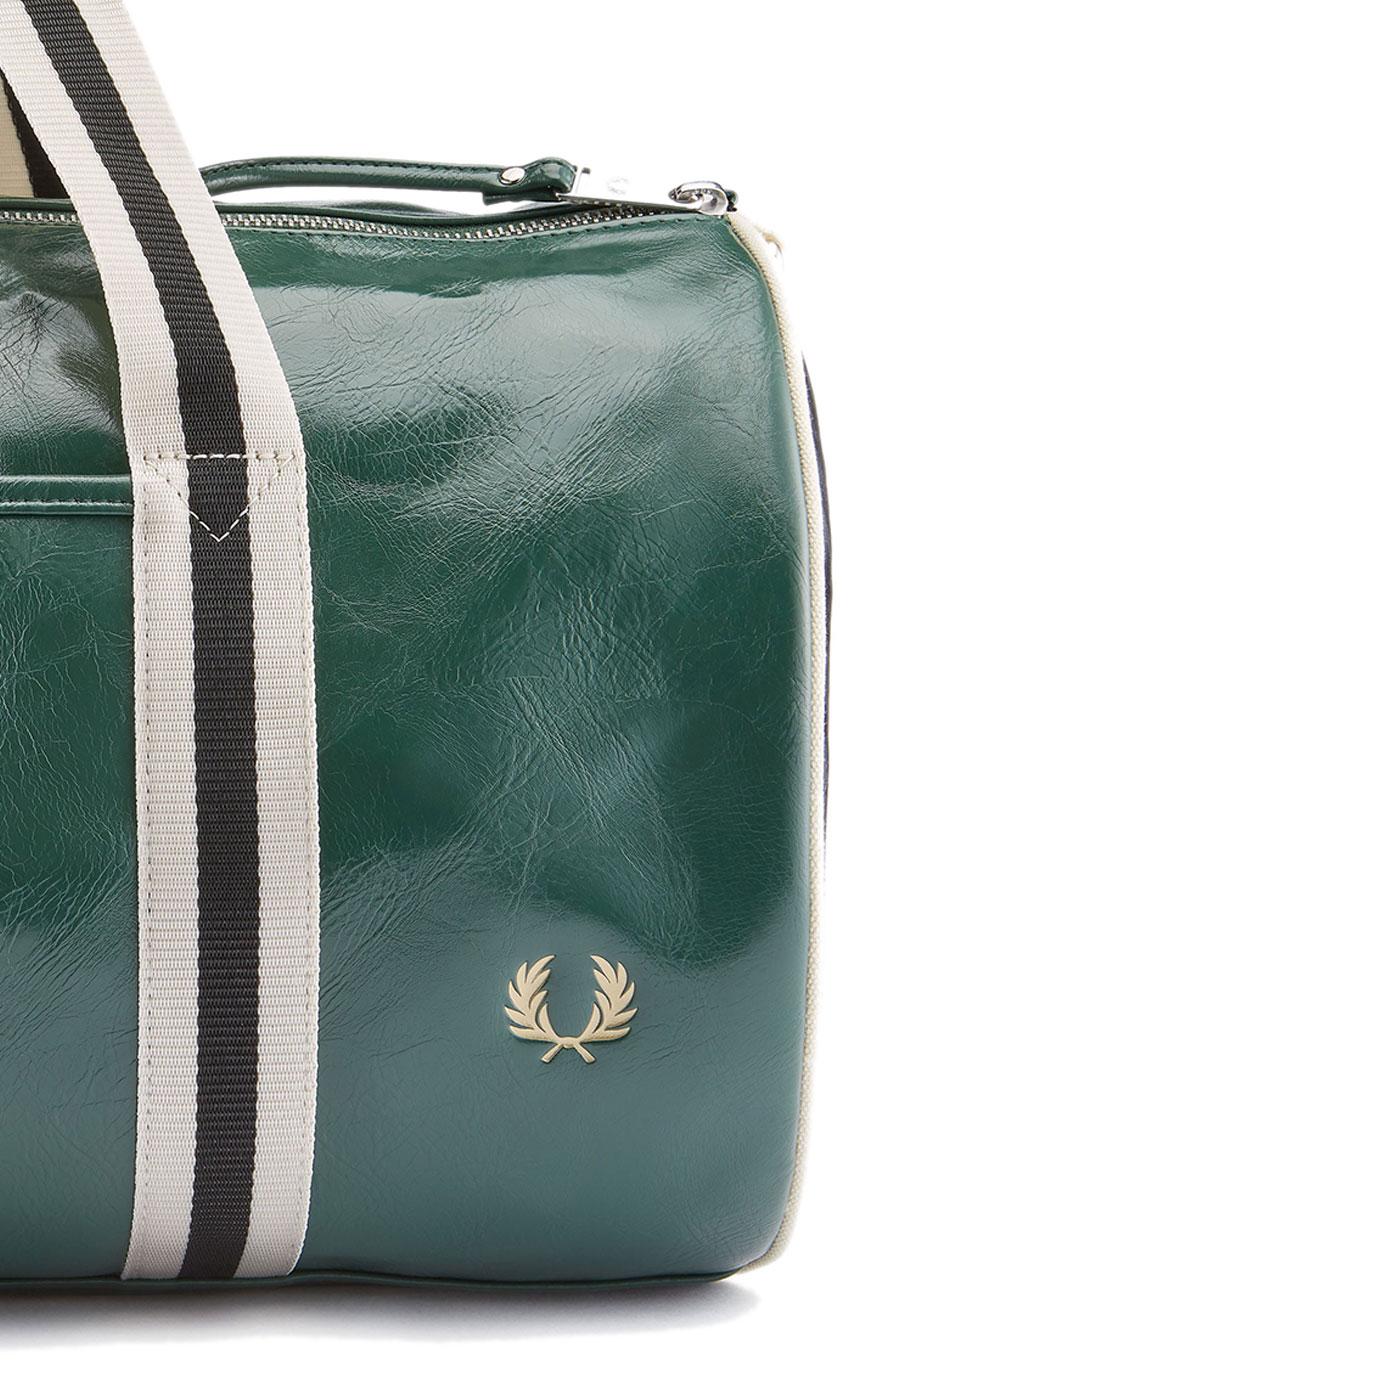 FRED PERRY Colour Block Classic Barrel Bag in Green/Black